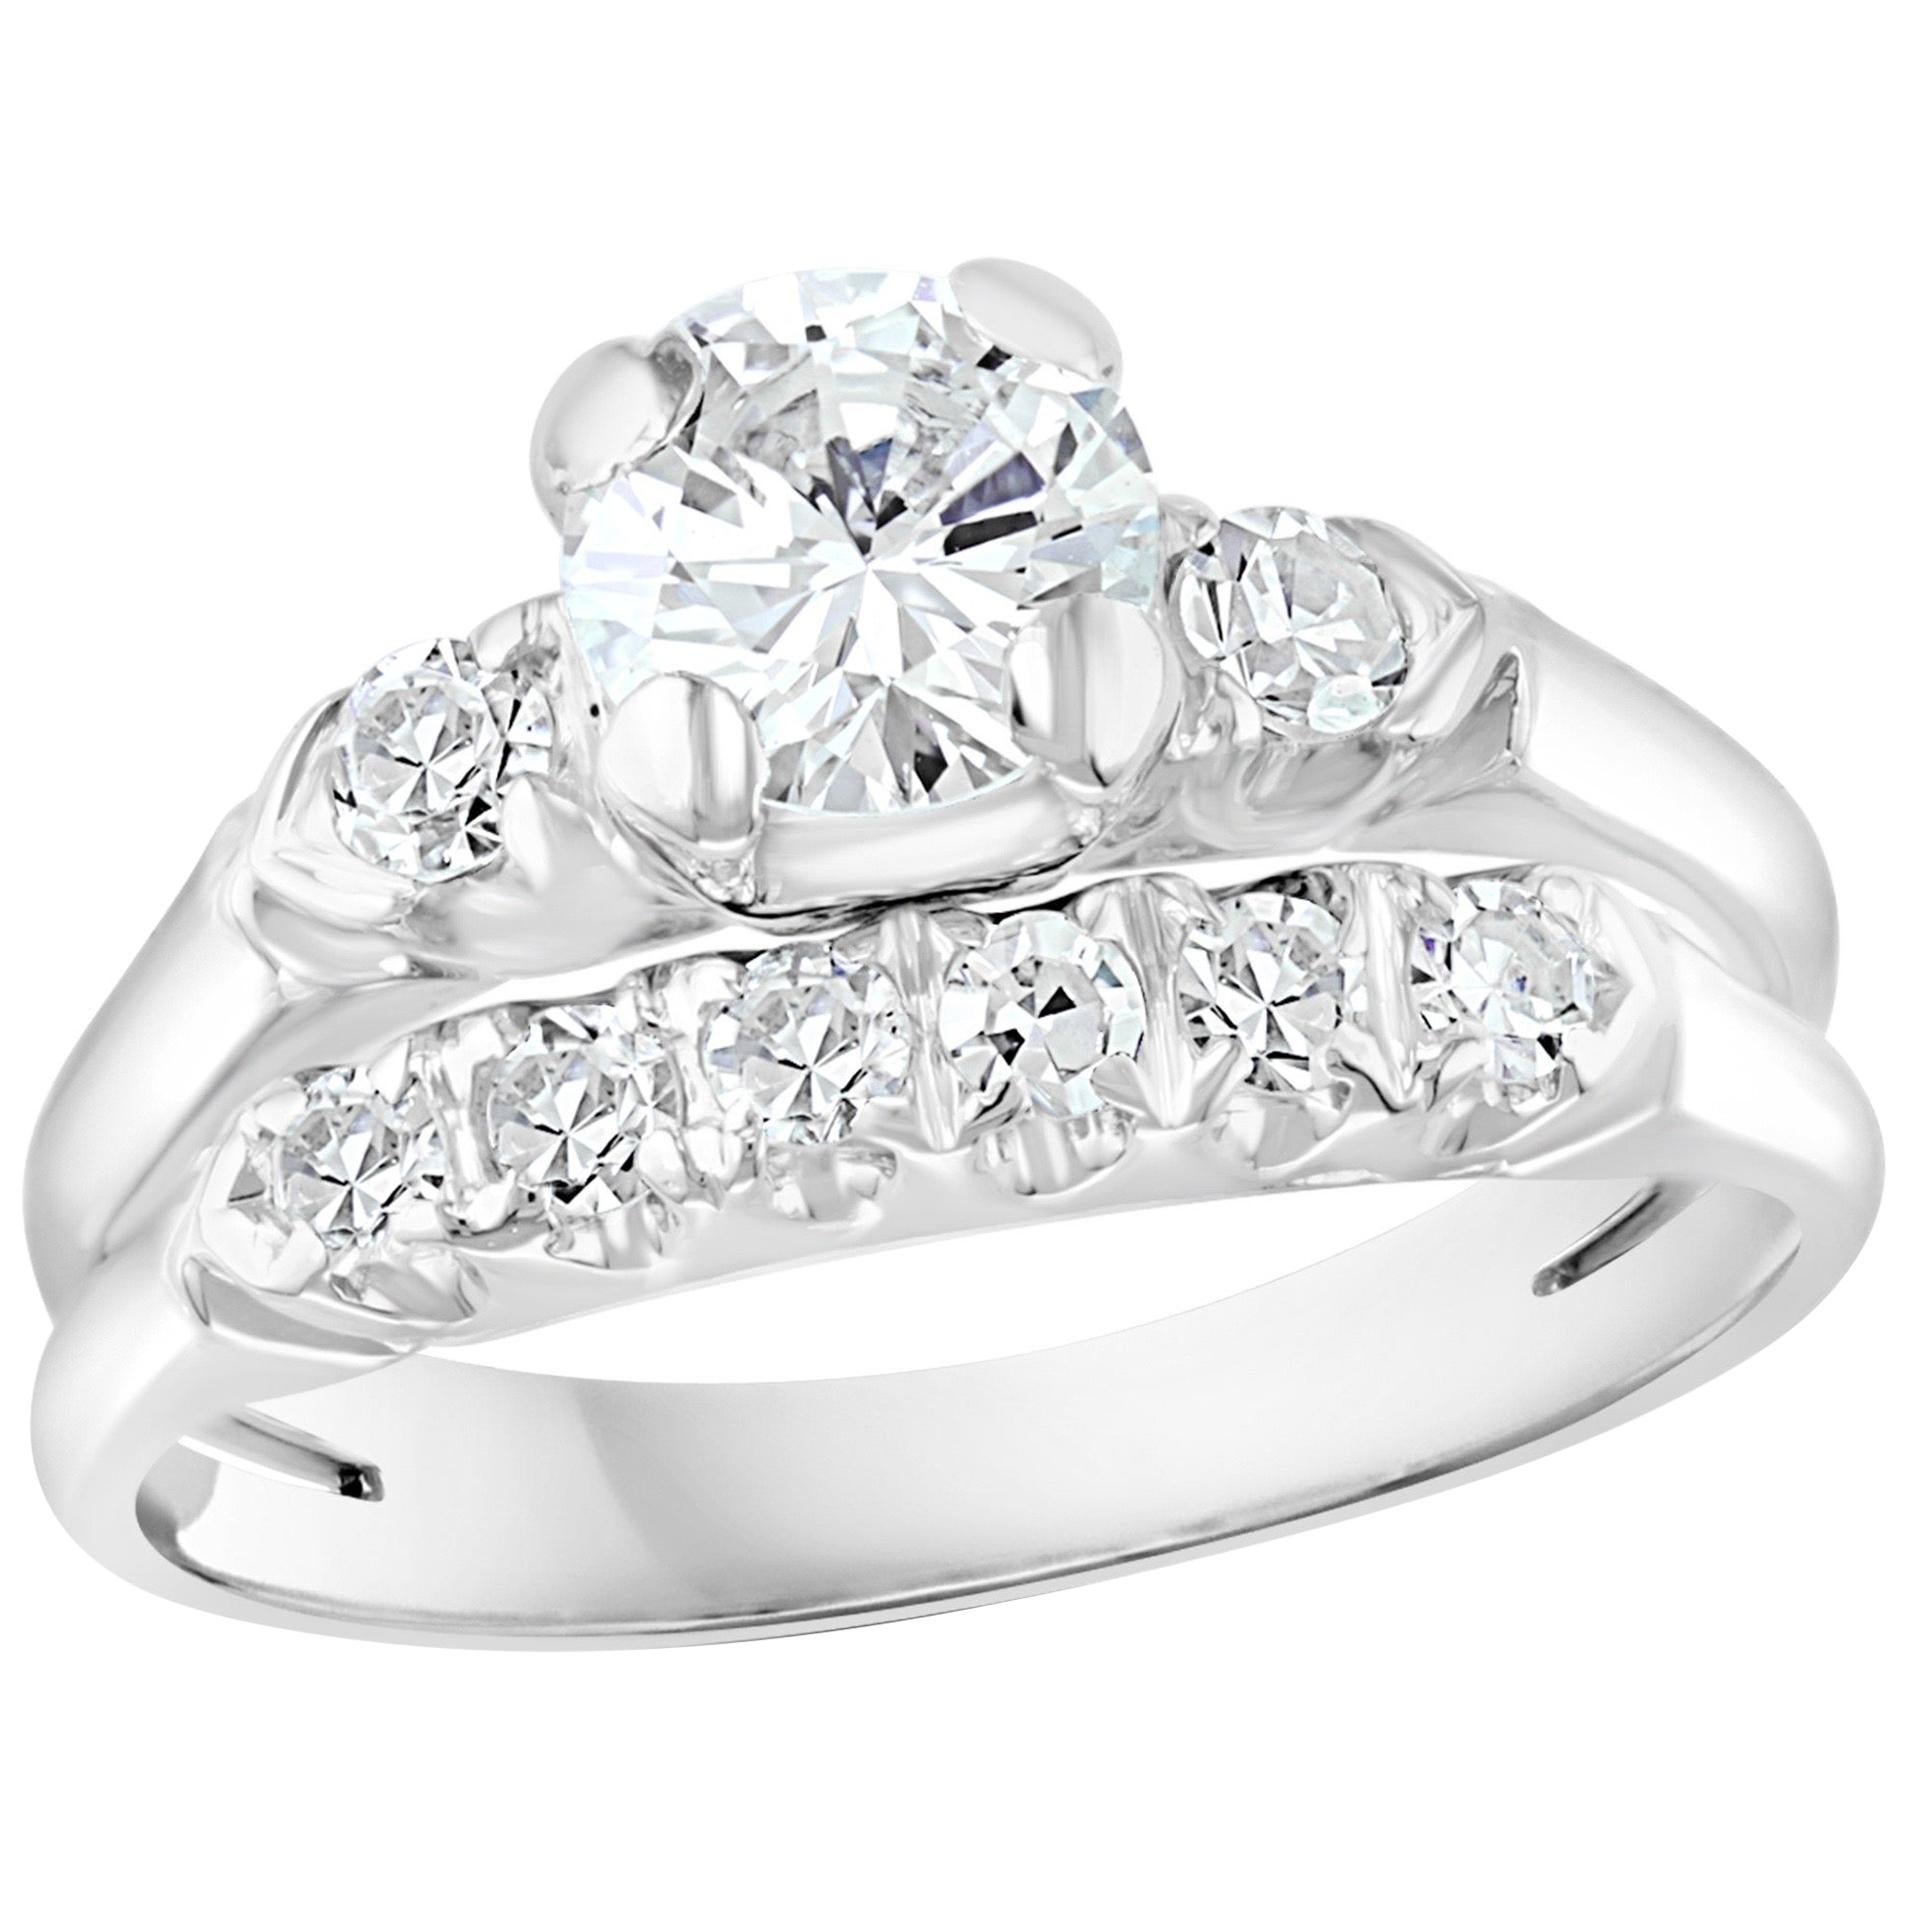 Approximately 0.6 Ct Solitaire Round Center Diamond 14 Kt White Gold Ring & Band For Sale